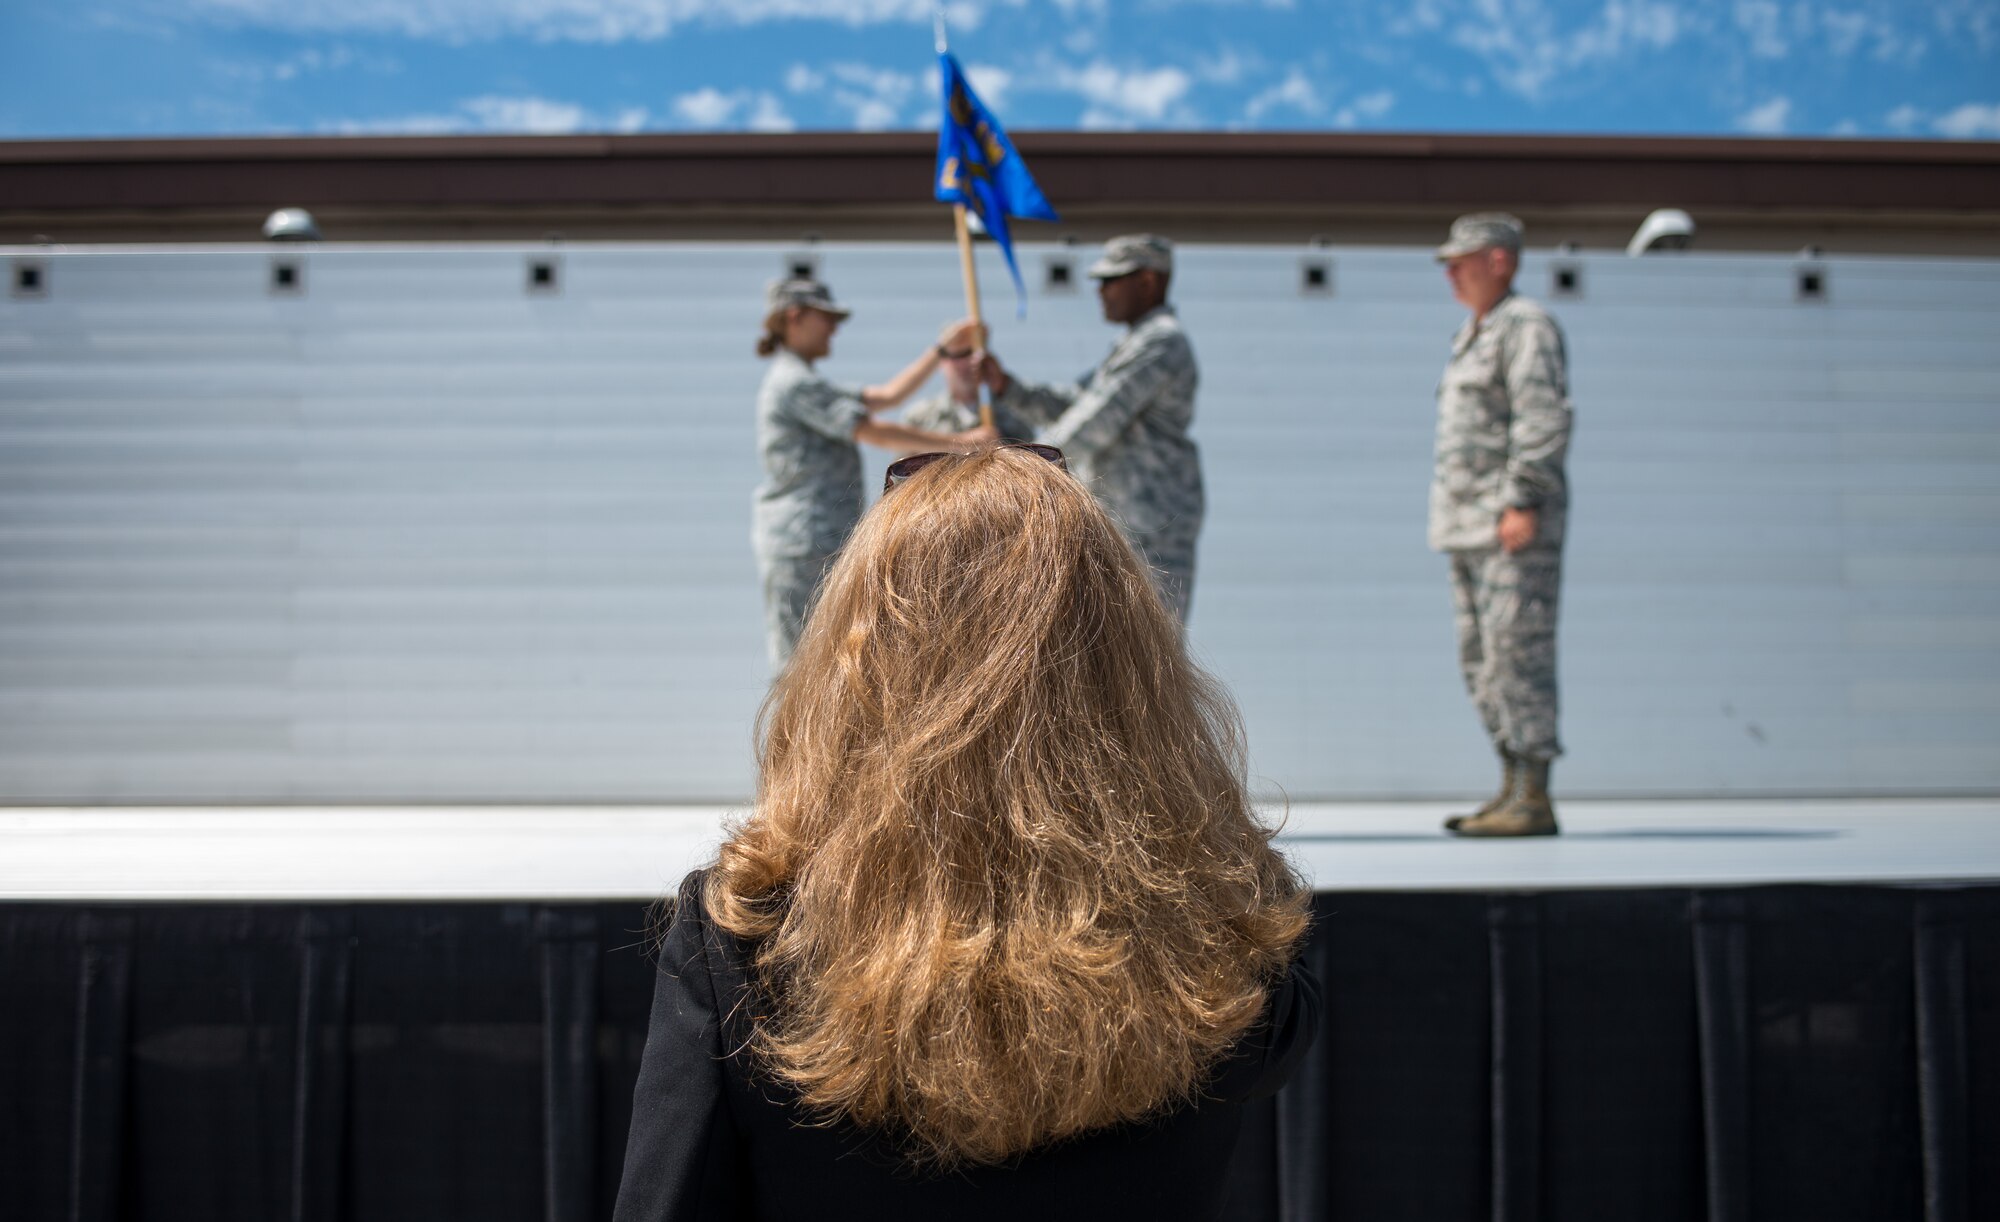 Teresa Bracher, 86th Airlift Wing chief of protocol, watches a change of command dry-run July 17, 2014 on Ramstein Air Base, Germany. The wing protocol office is made up of four Airmen who provide support to approximately 22,000 military members and Department of Defense civilians. (U.S. Air Force photo/Senior Airman Jonathan Stefanko)